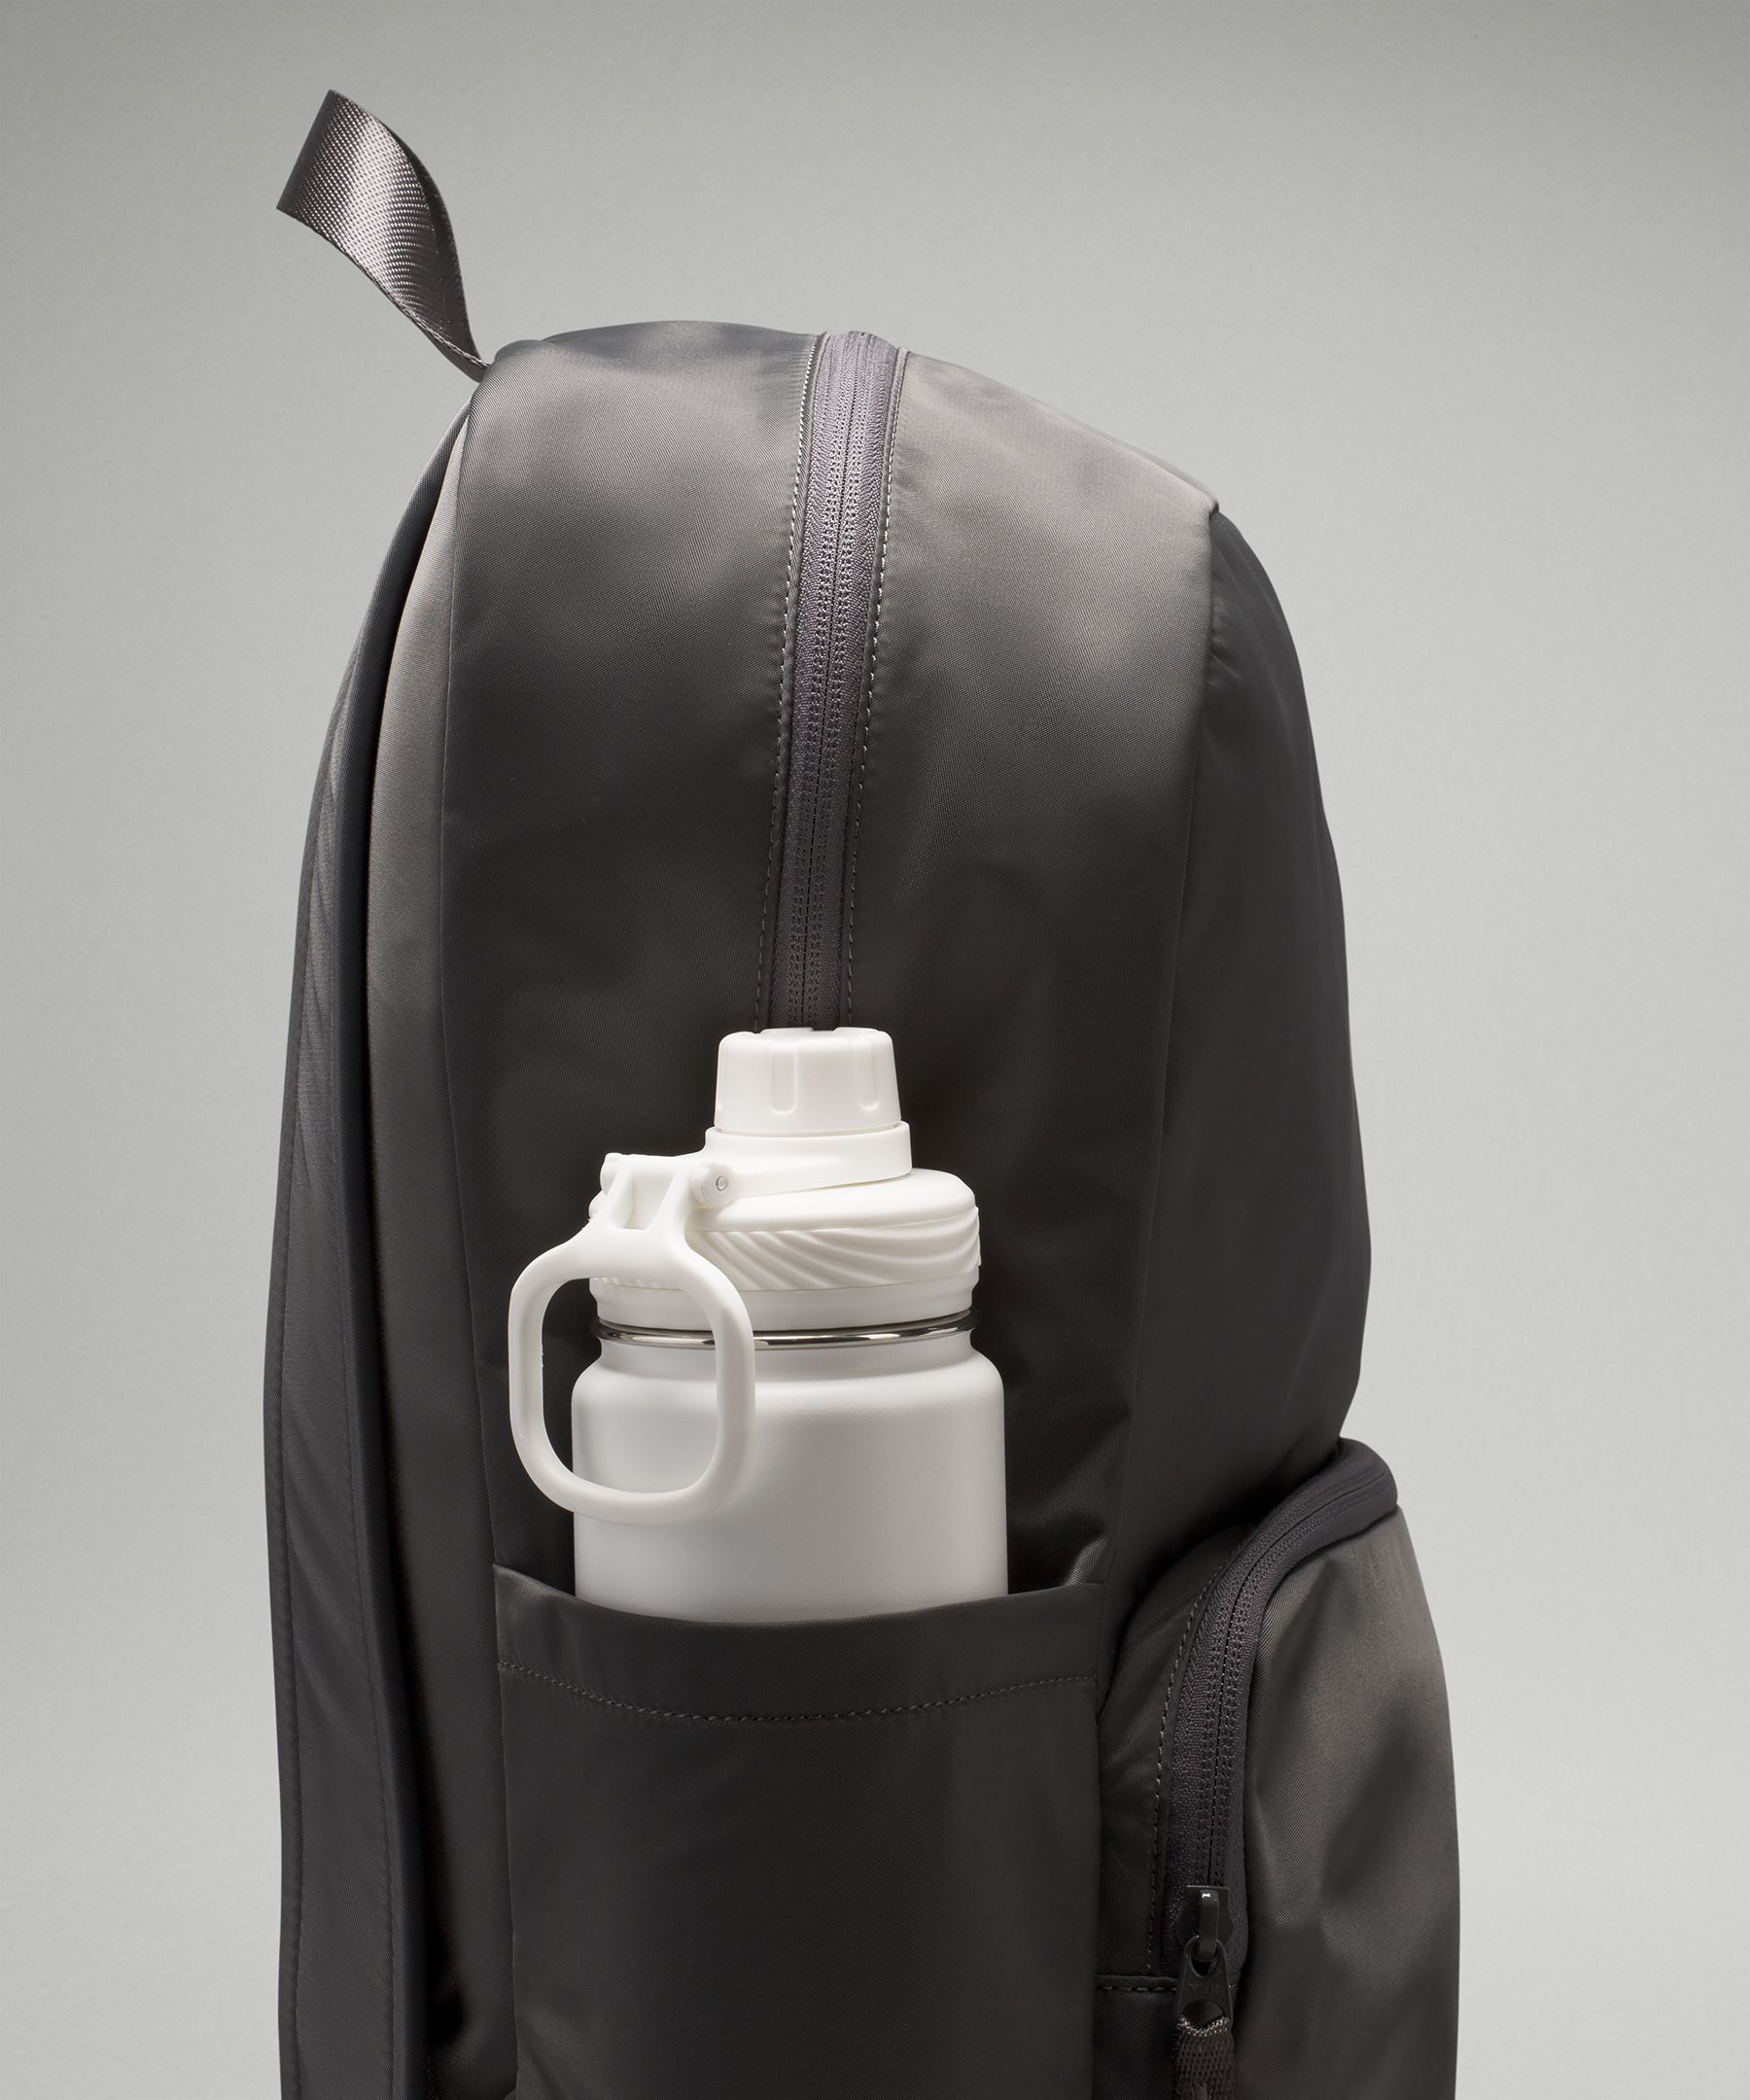 Shop Lululemon Backpack With Laptop Compartment - Everywhere 22l